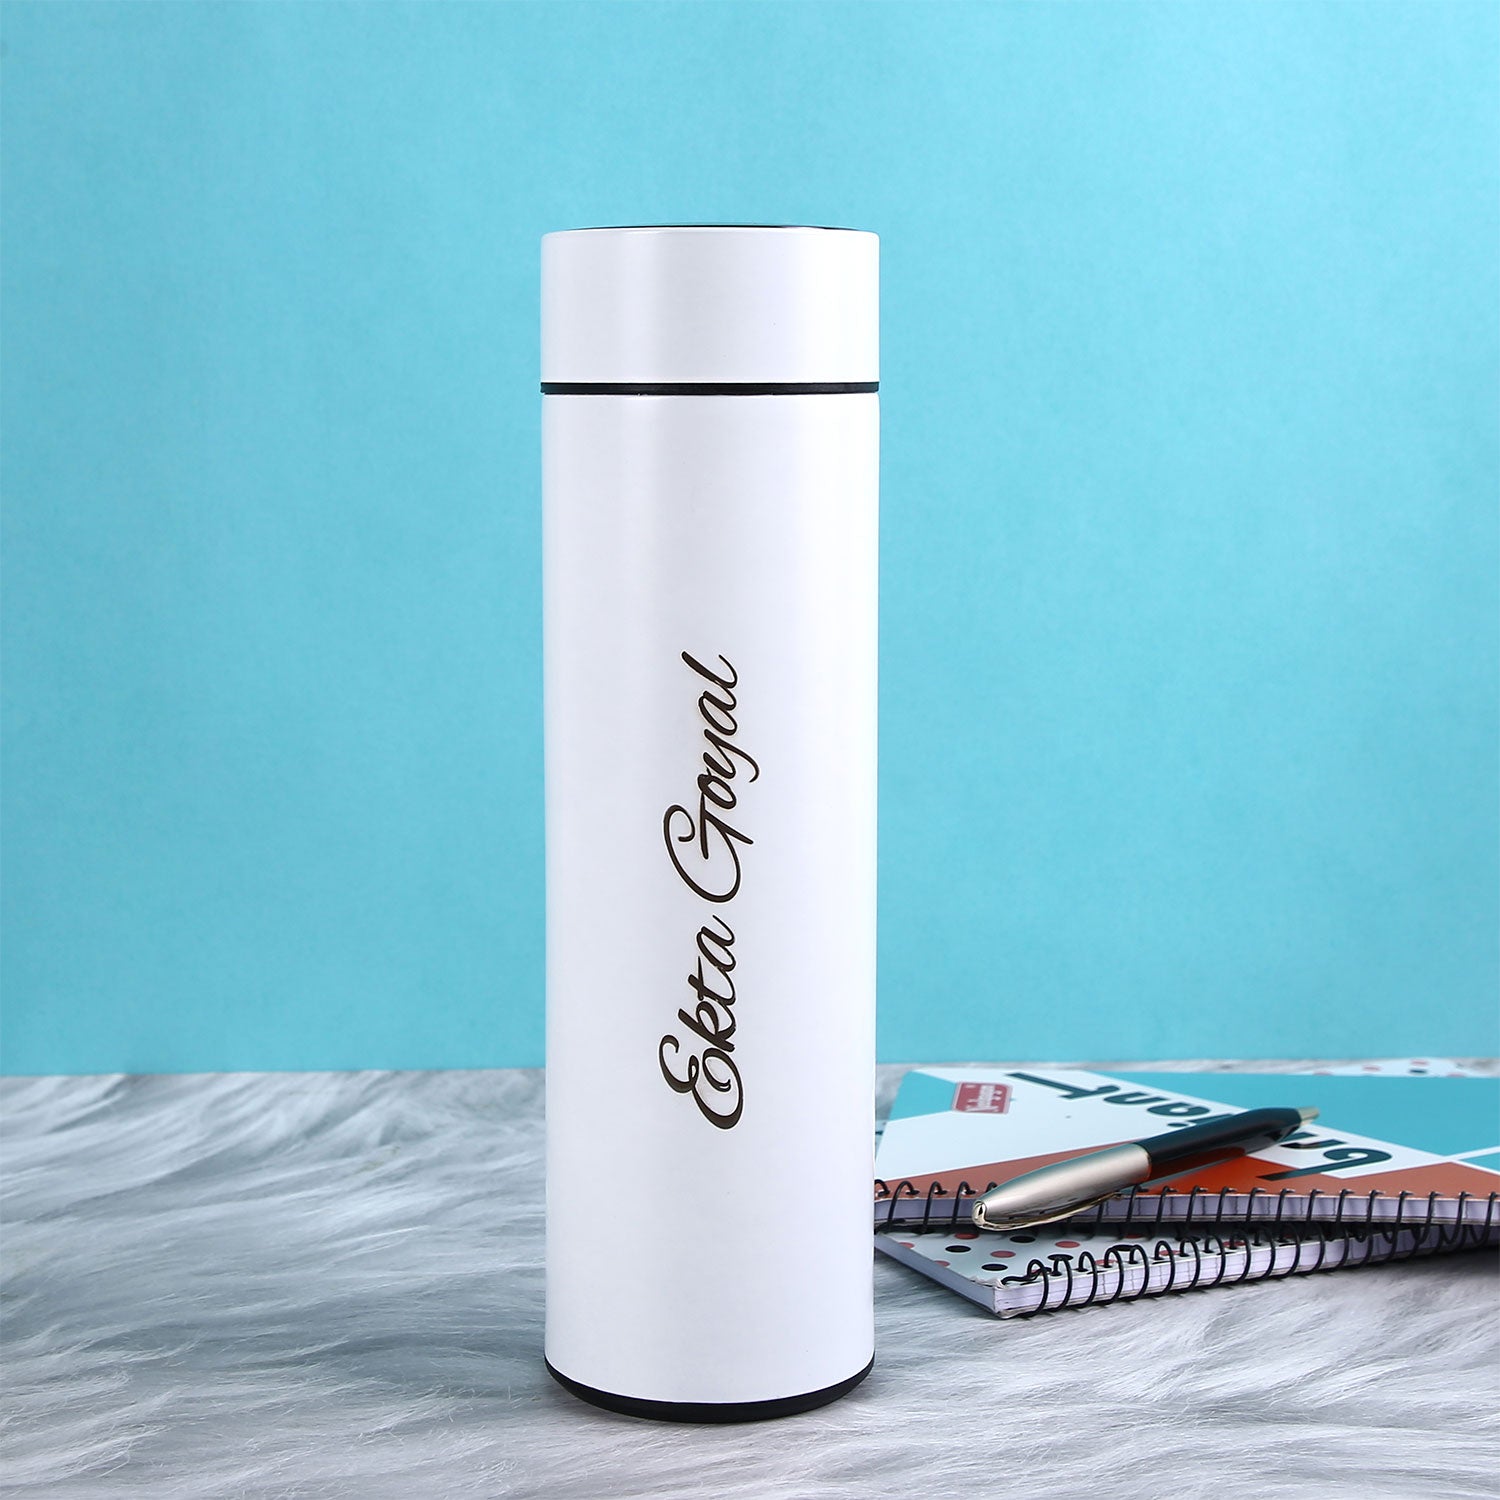 Personalized White Smart Temperature Water Bottle